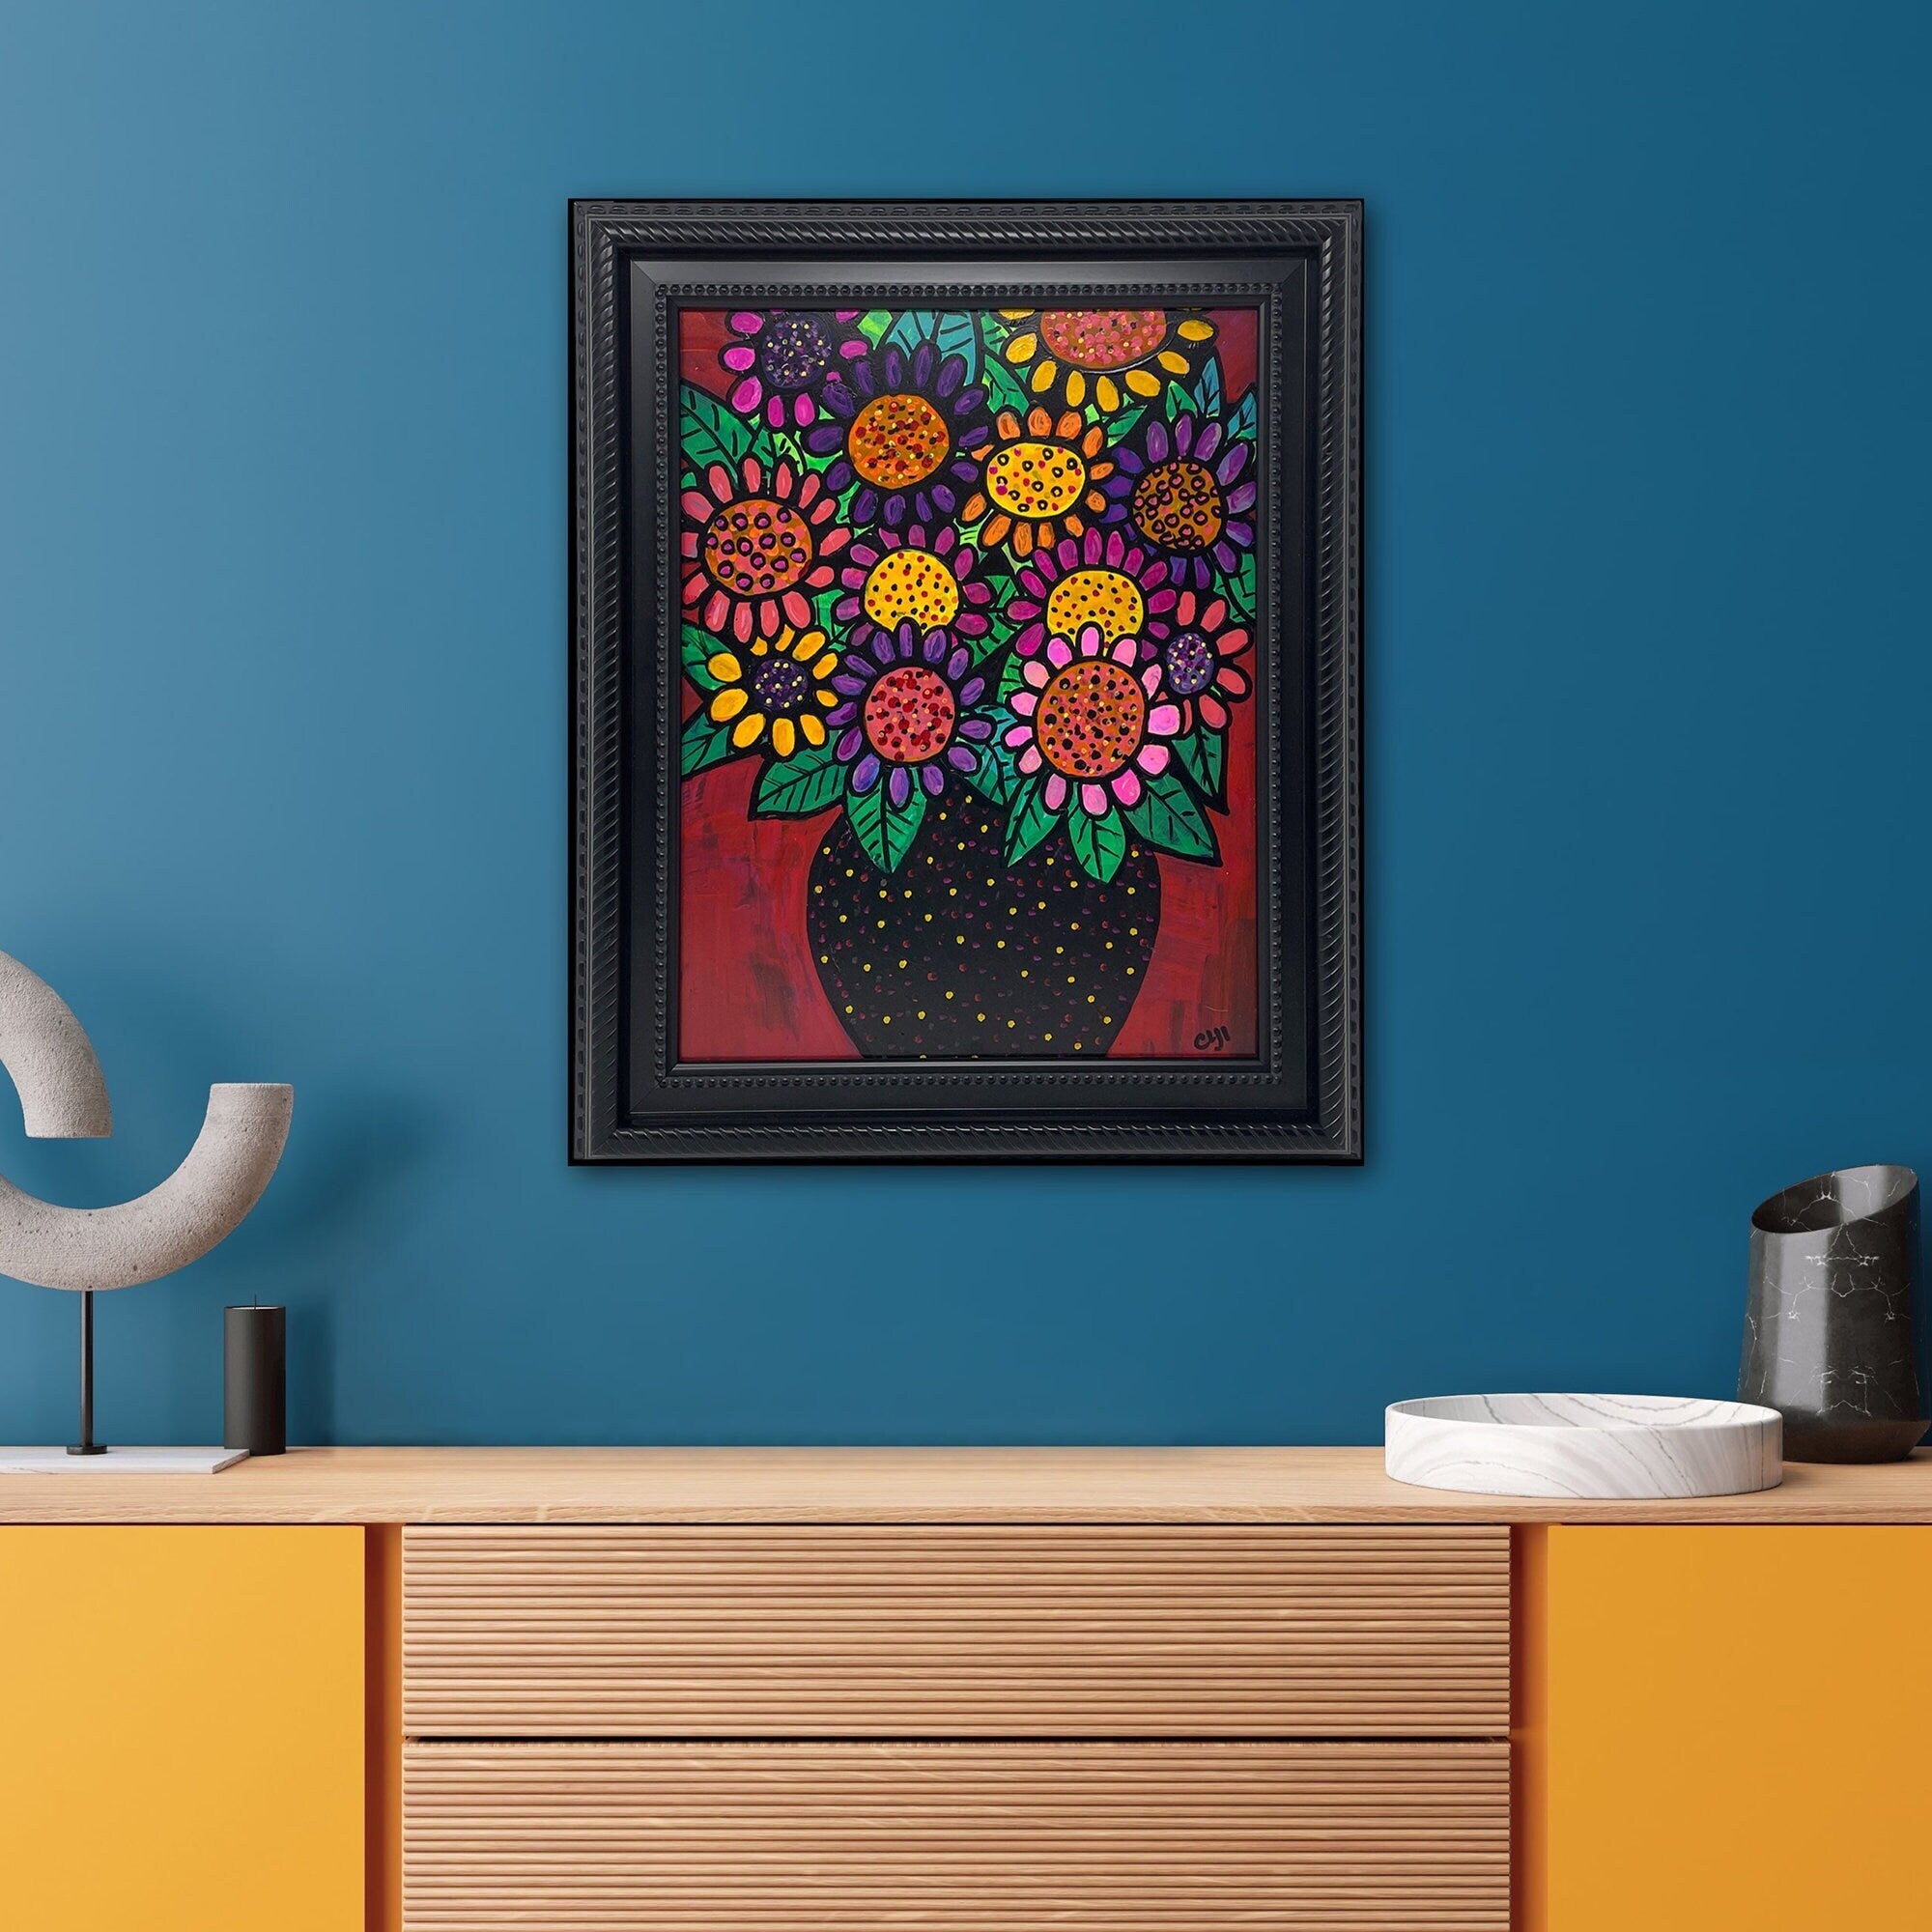 Whimsical Abstract Flower Painting - Original Contemporary Art - Colorful Floral Still Life in Red, Yellow, Purple, Orange, Green, Black